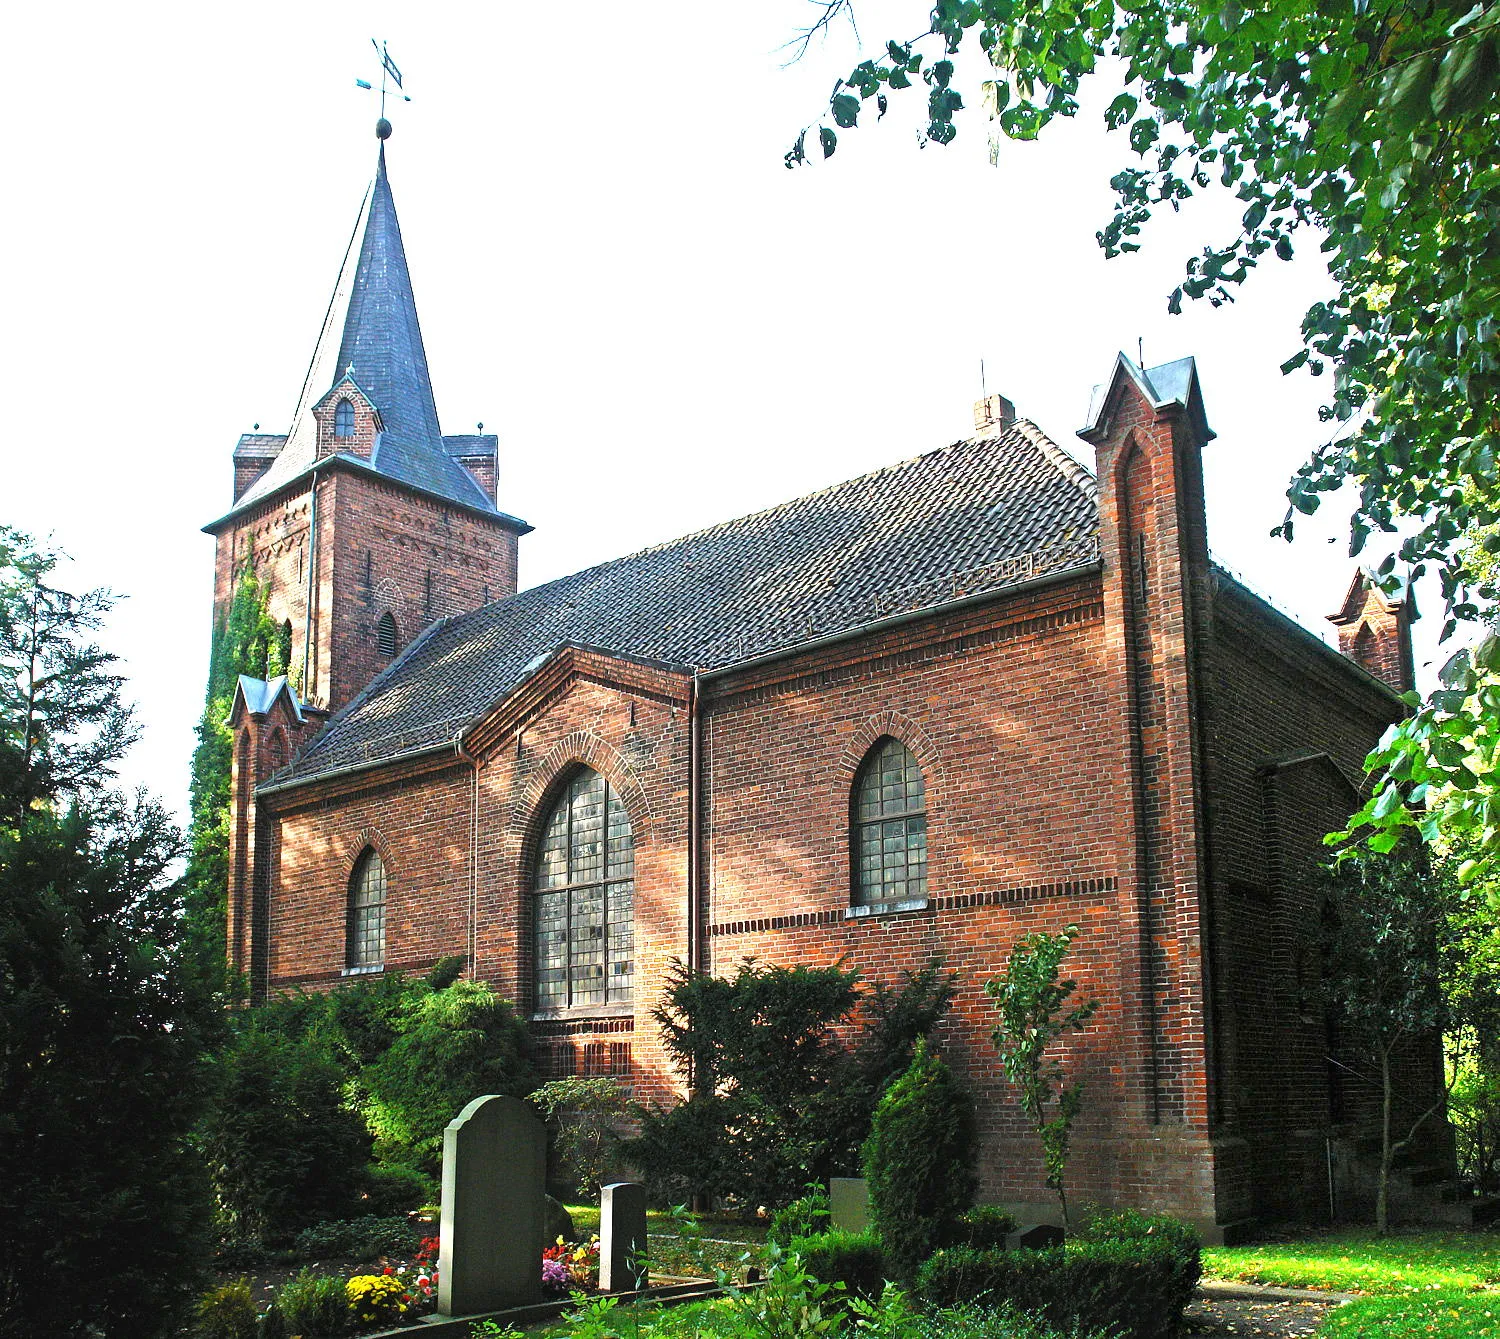 Photo showing: Moorlose Kirche in Mittelsbüren. Frühester neugotischer Kirchenbau in Bremen. Erbaut: 1846-47. Architekt: Anton Theodor Eggers. The object shown is a protected cultural monument in the Free Hanseatic City of Bremen with the number 1302  registered with the State Office for Monument Preservation. → Datenbankeintrag